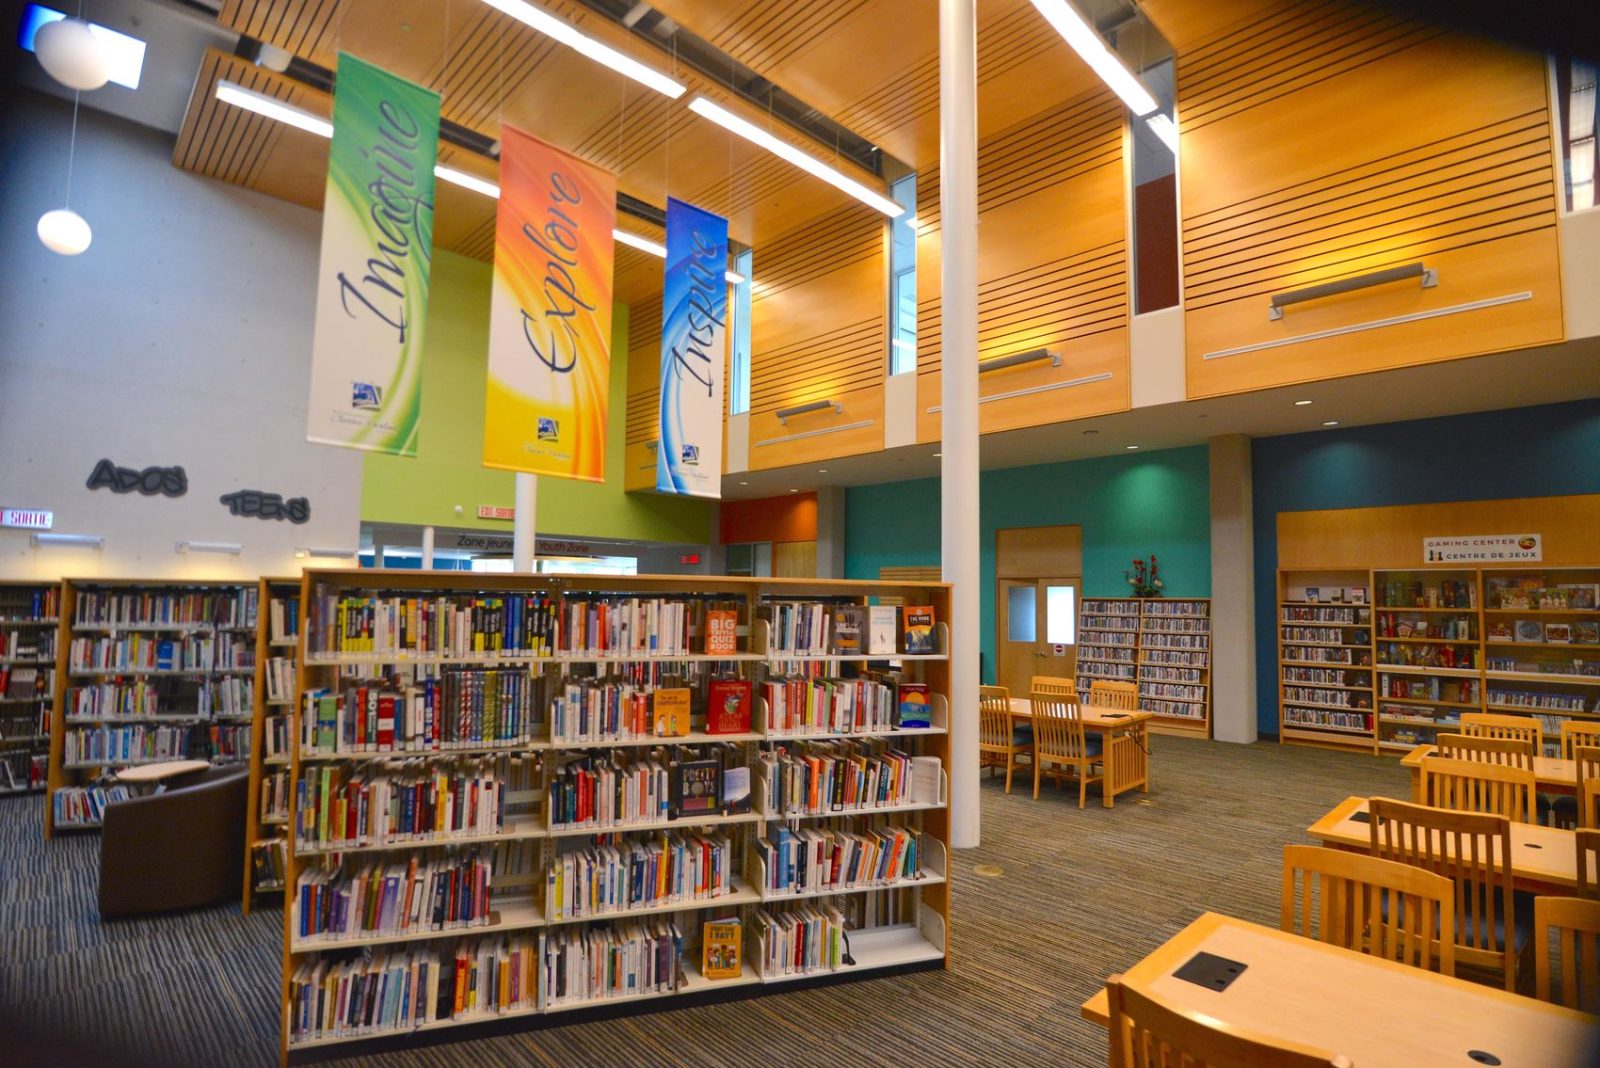 Library proposes novel funding model